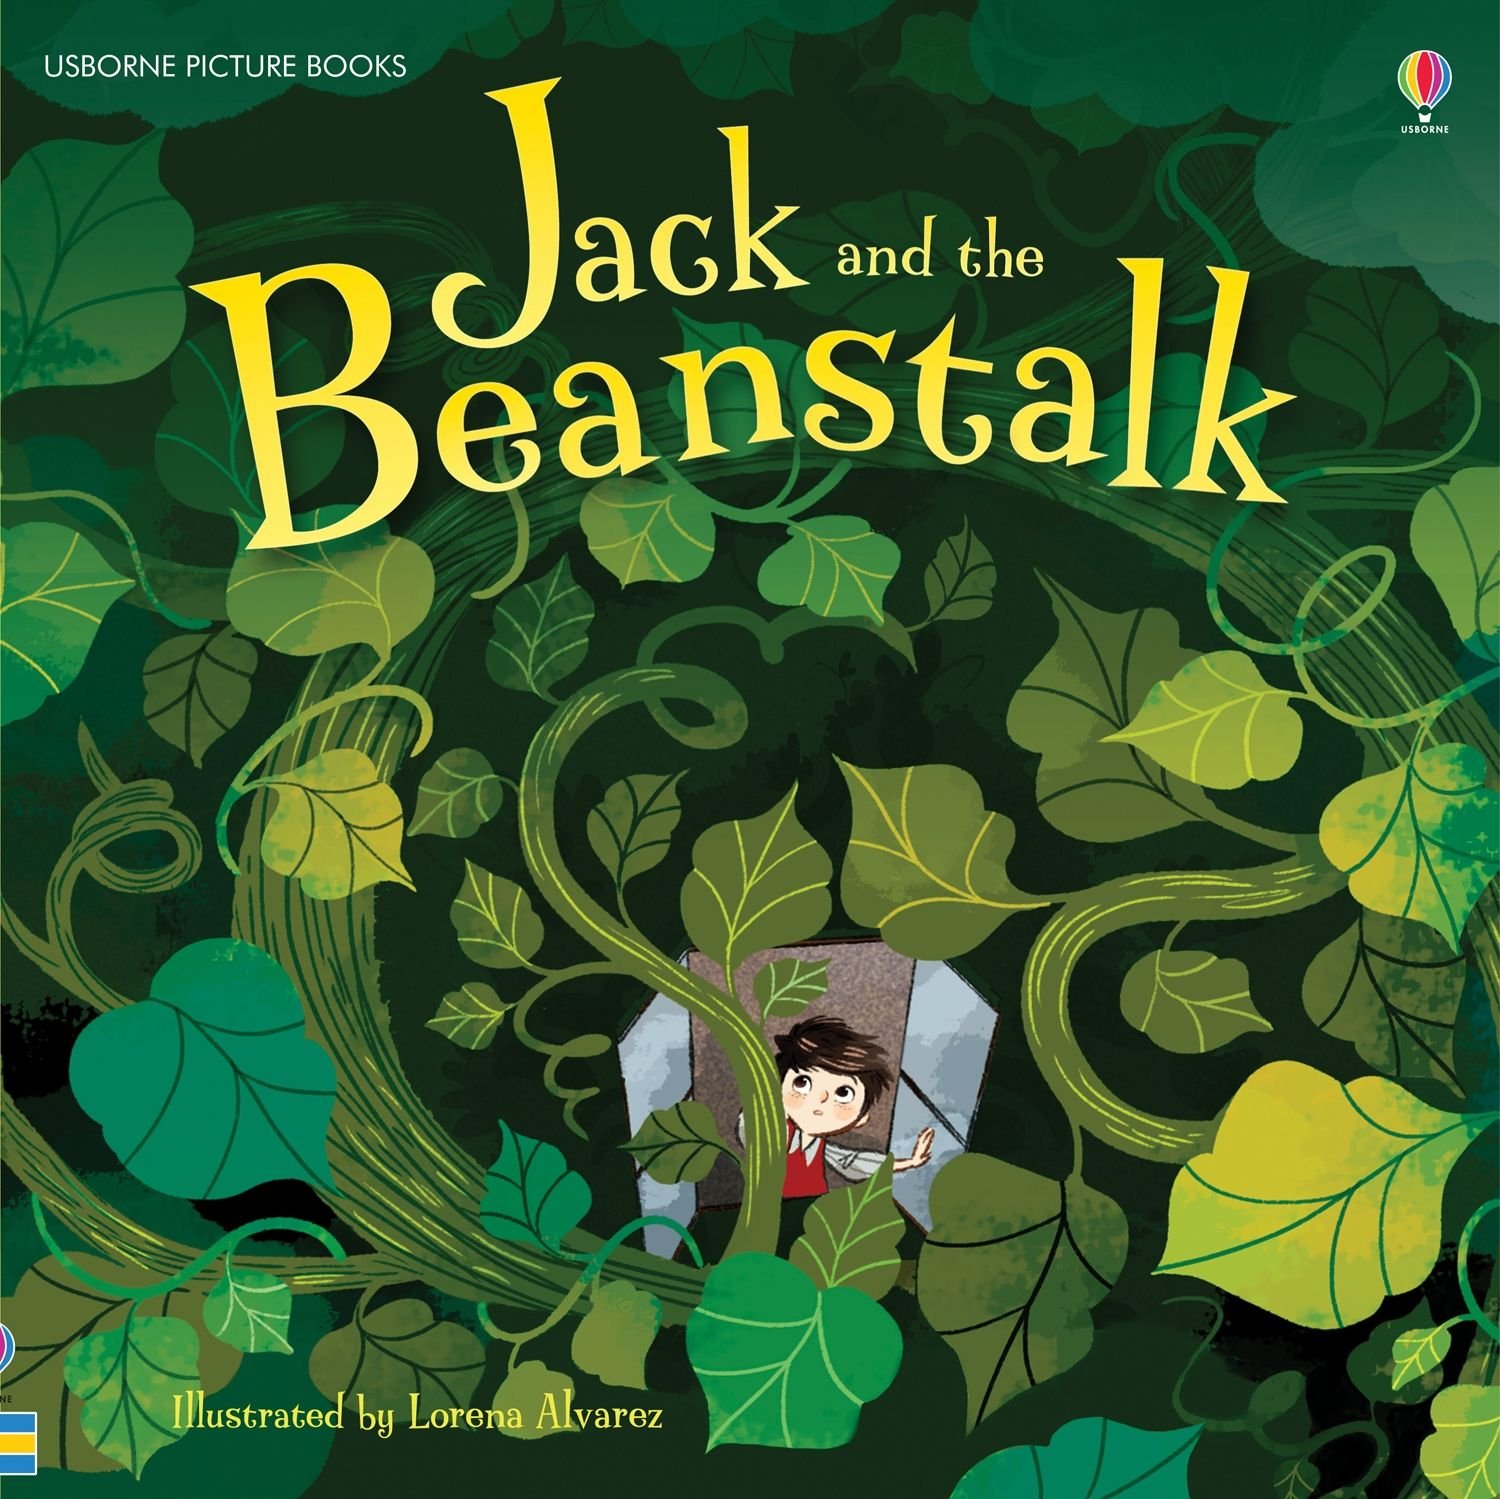 Picture book -Jack and the Beanstalk